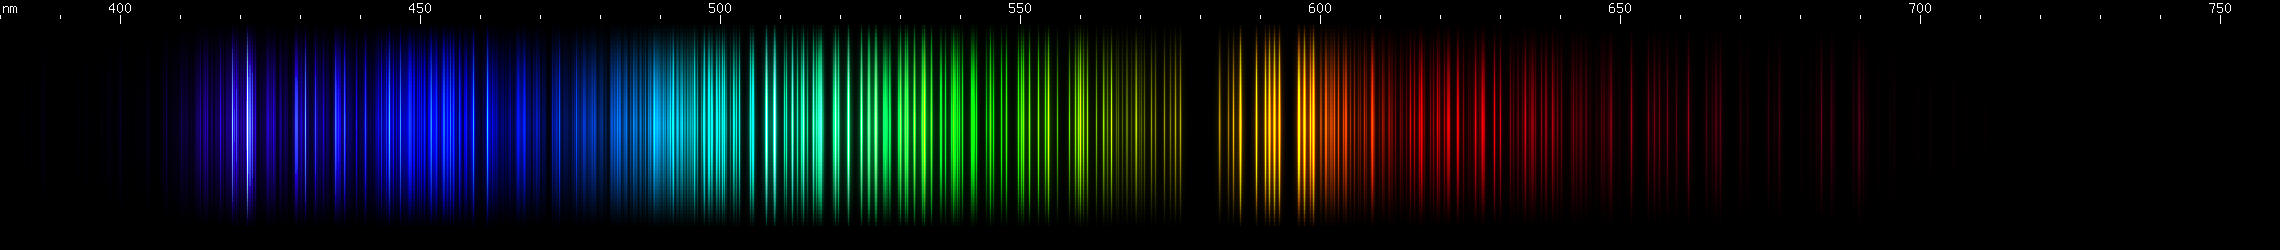 Spectral lines of Dysprosium.